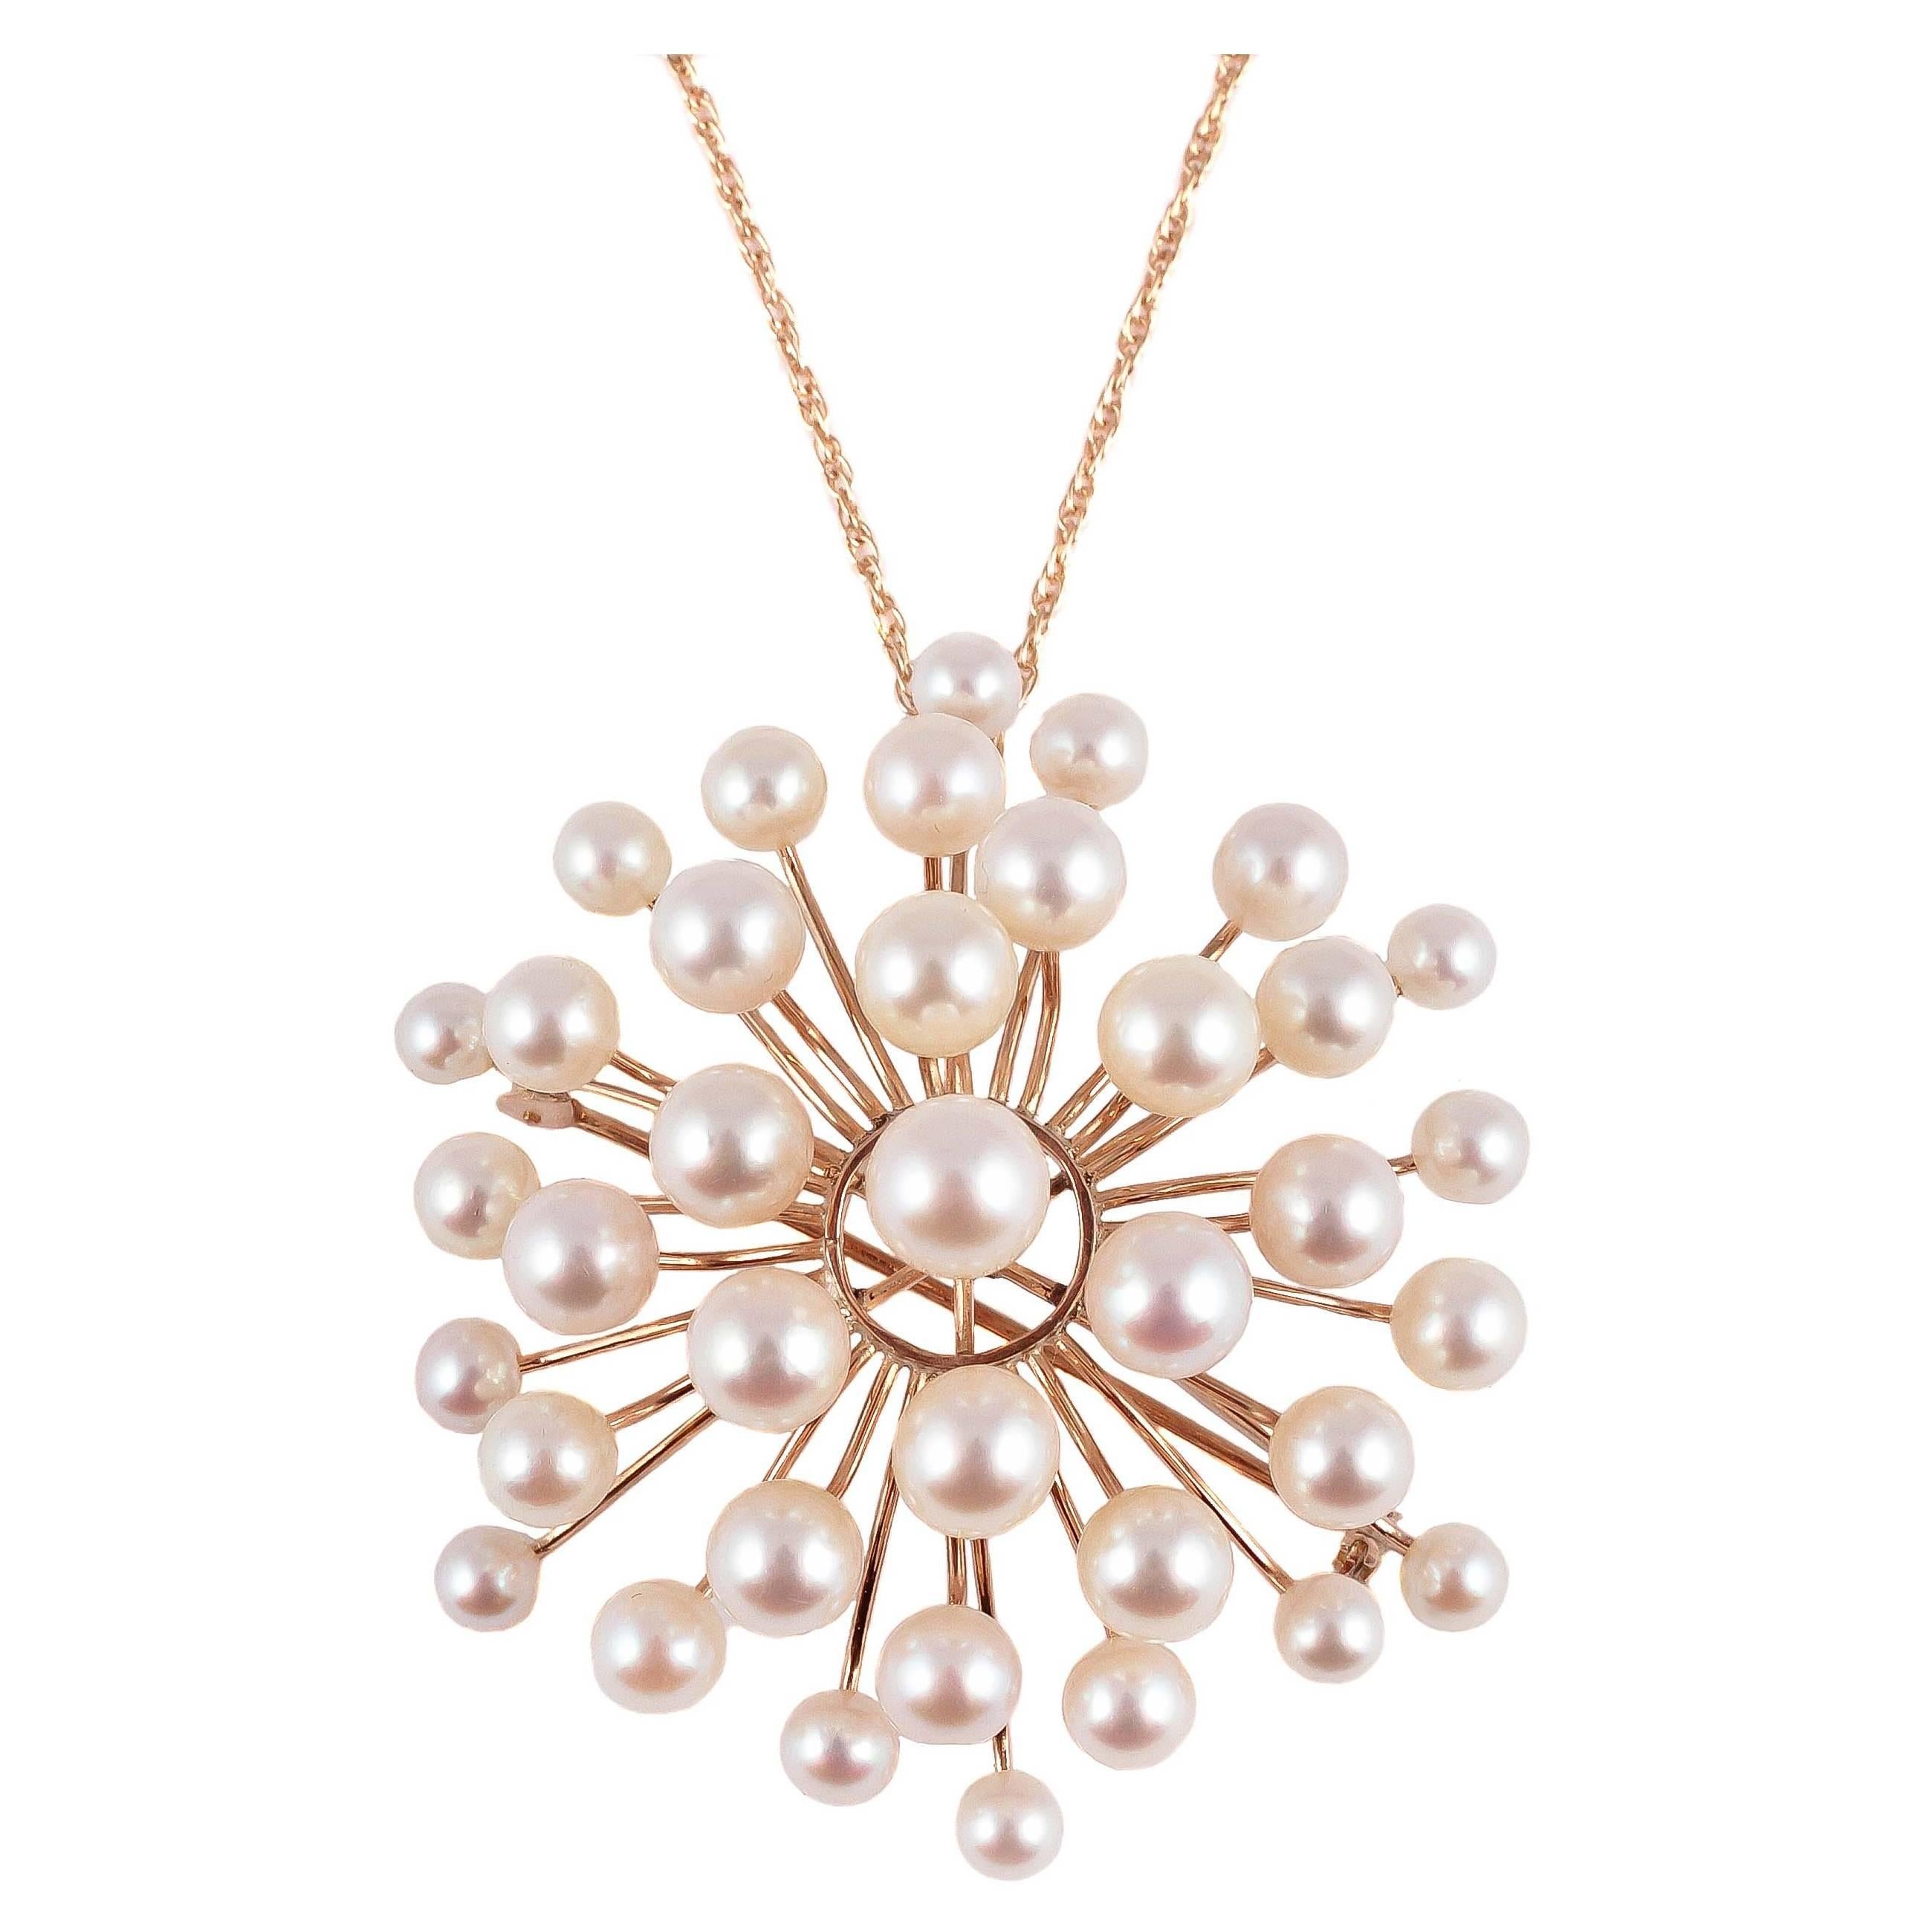 1970's Gold Pin Pendant in a Spray of Cultured Pearls